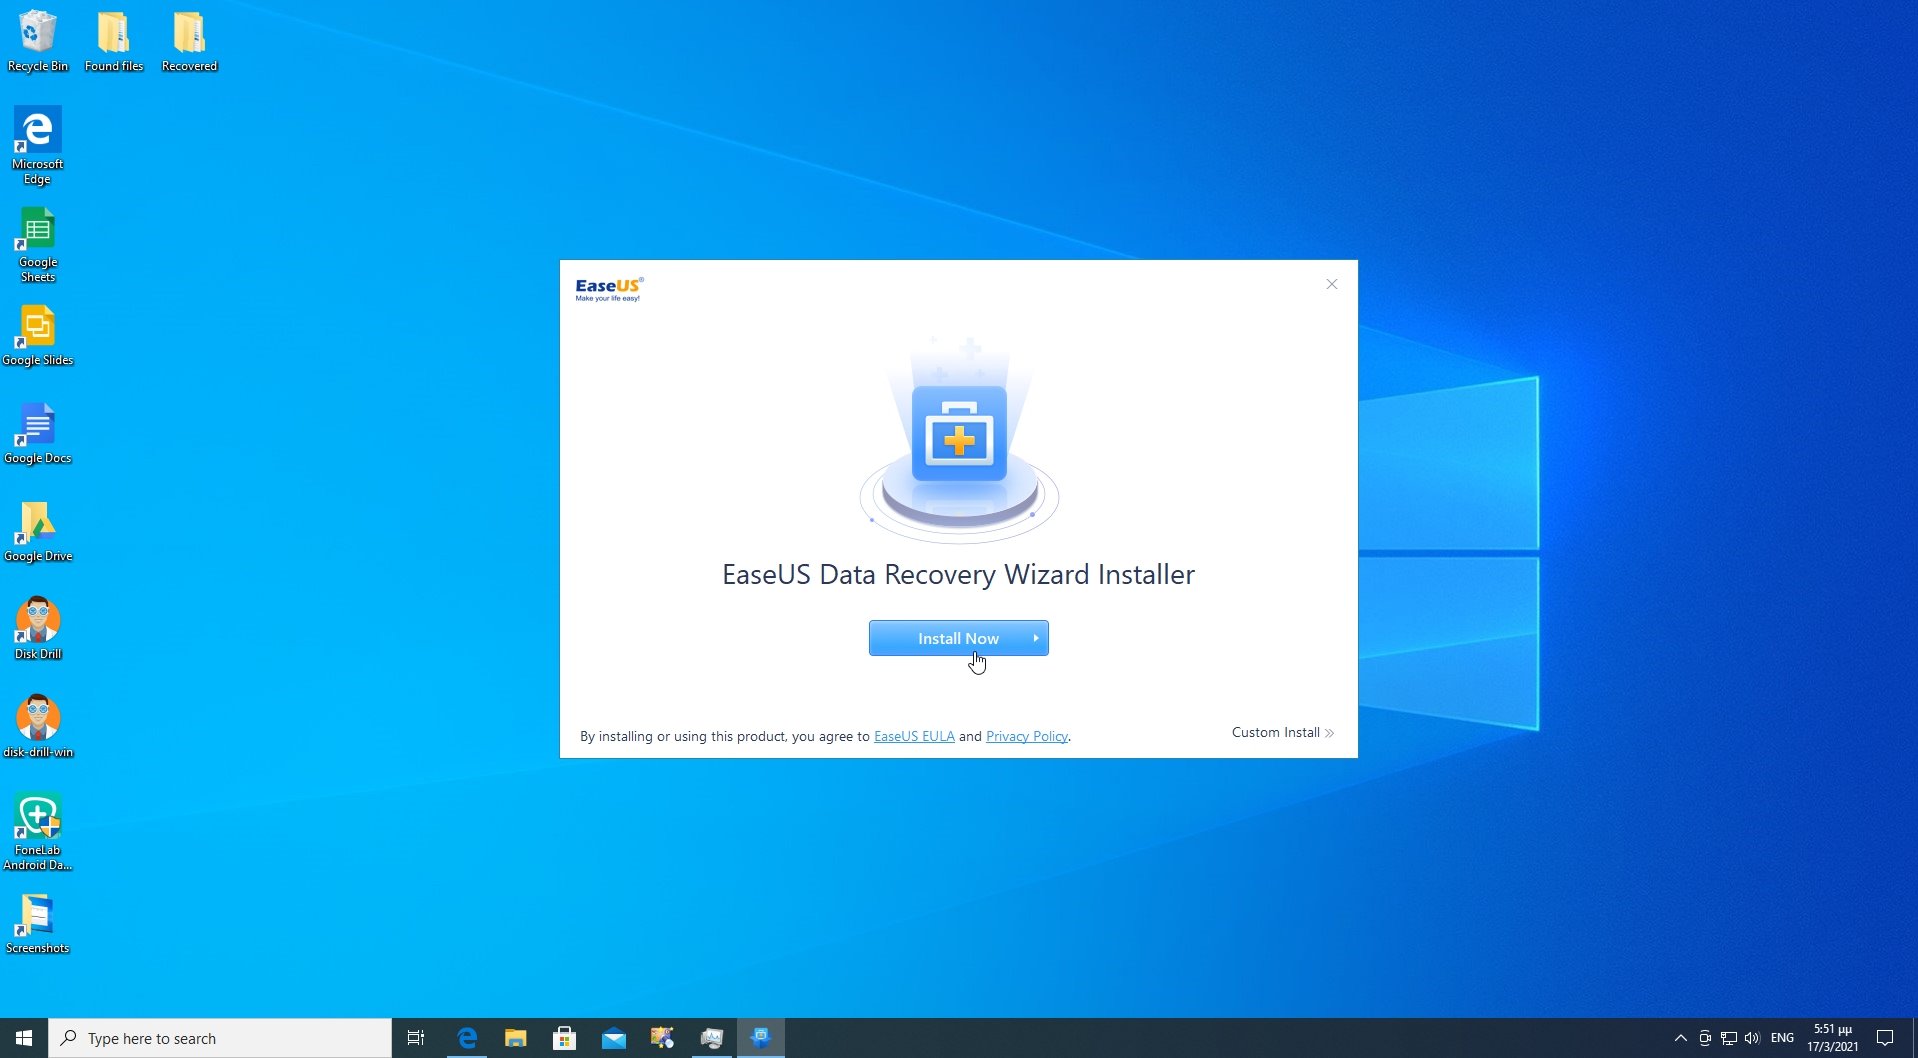 EaseUS Data Recovery Wizard's installation is a straightforward series of steps.